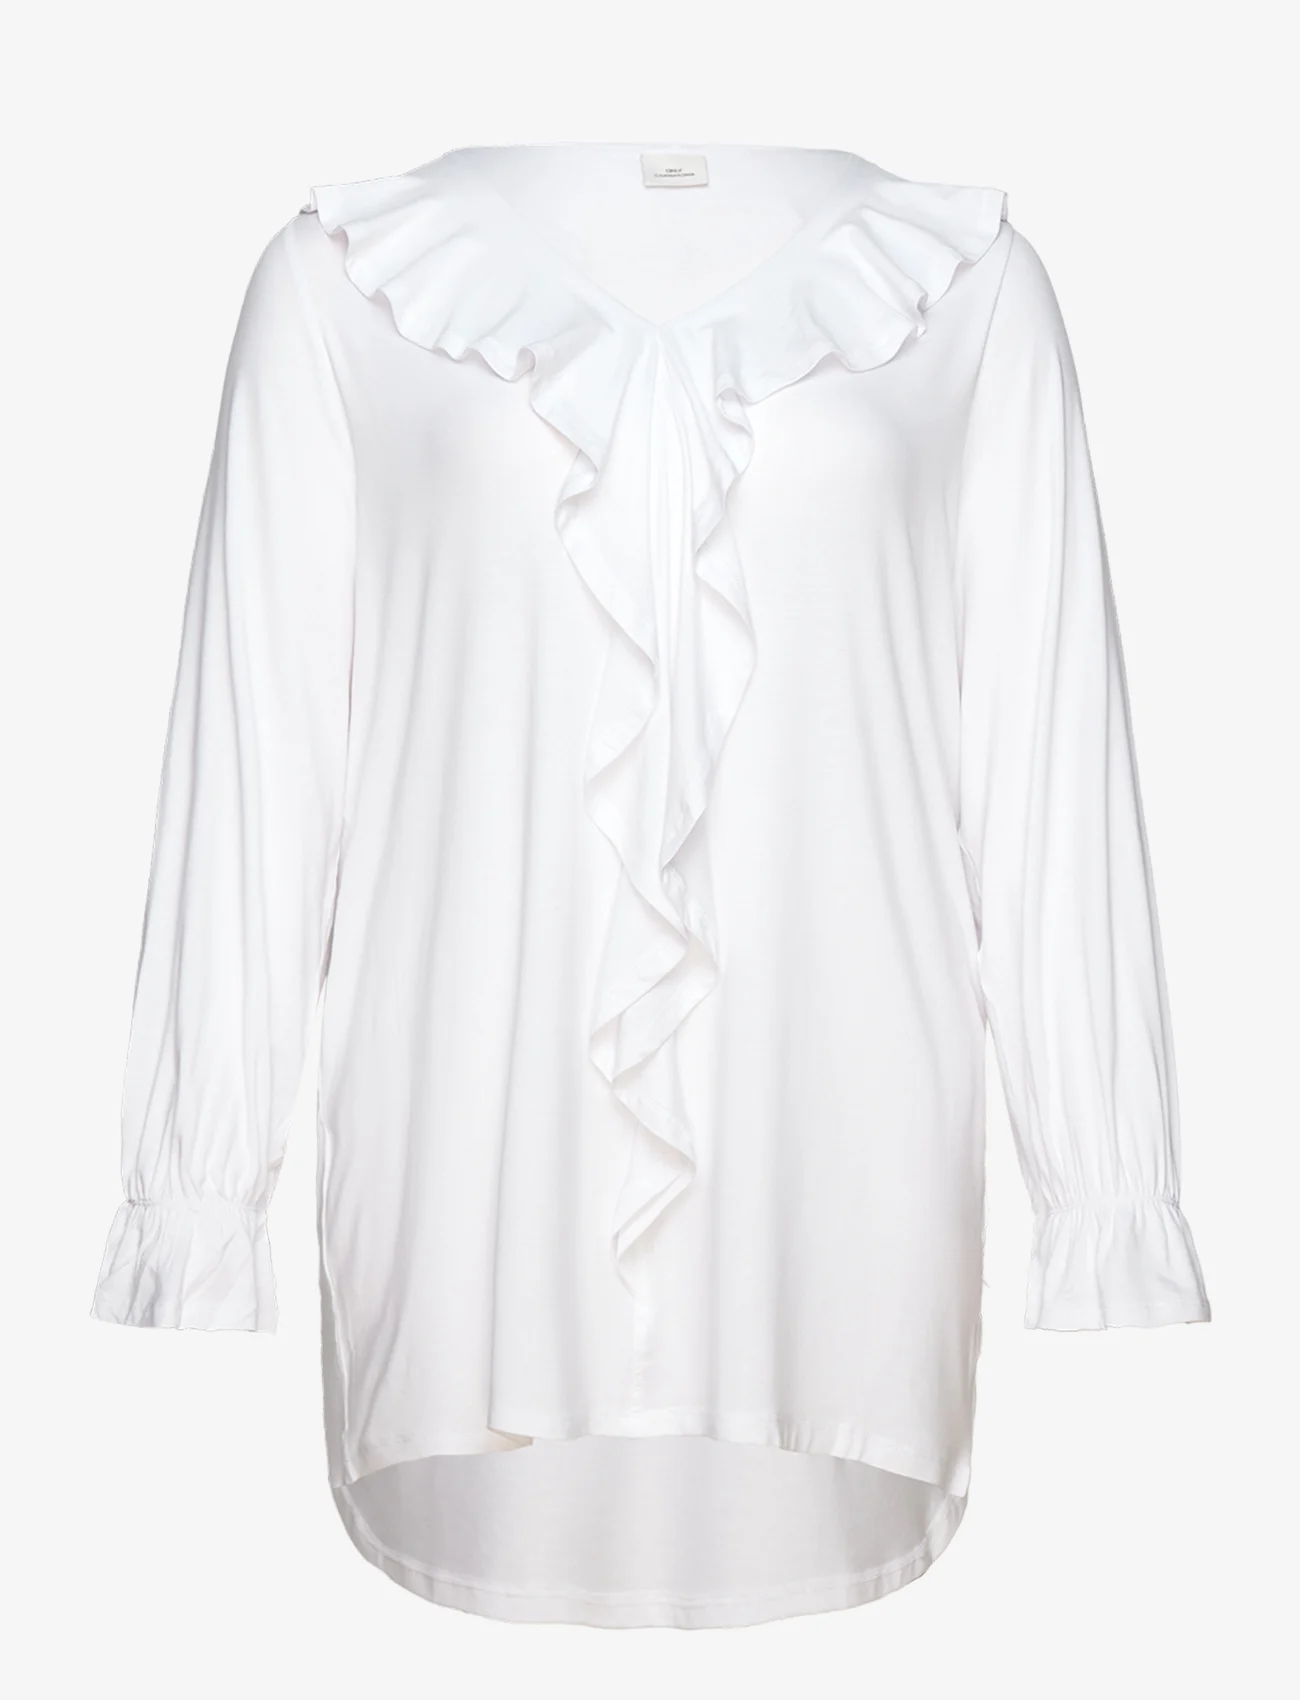 ONLY Carmakoma - CARCLARISA LIFE V-NECK FRILL L/S TOP JRS - long-sleeved blouses - bright white - 0